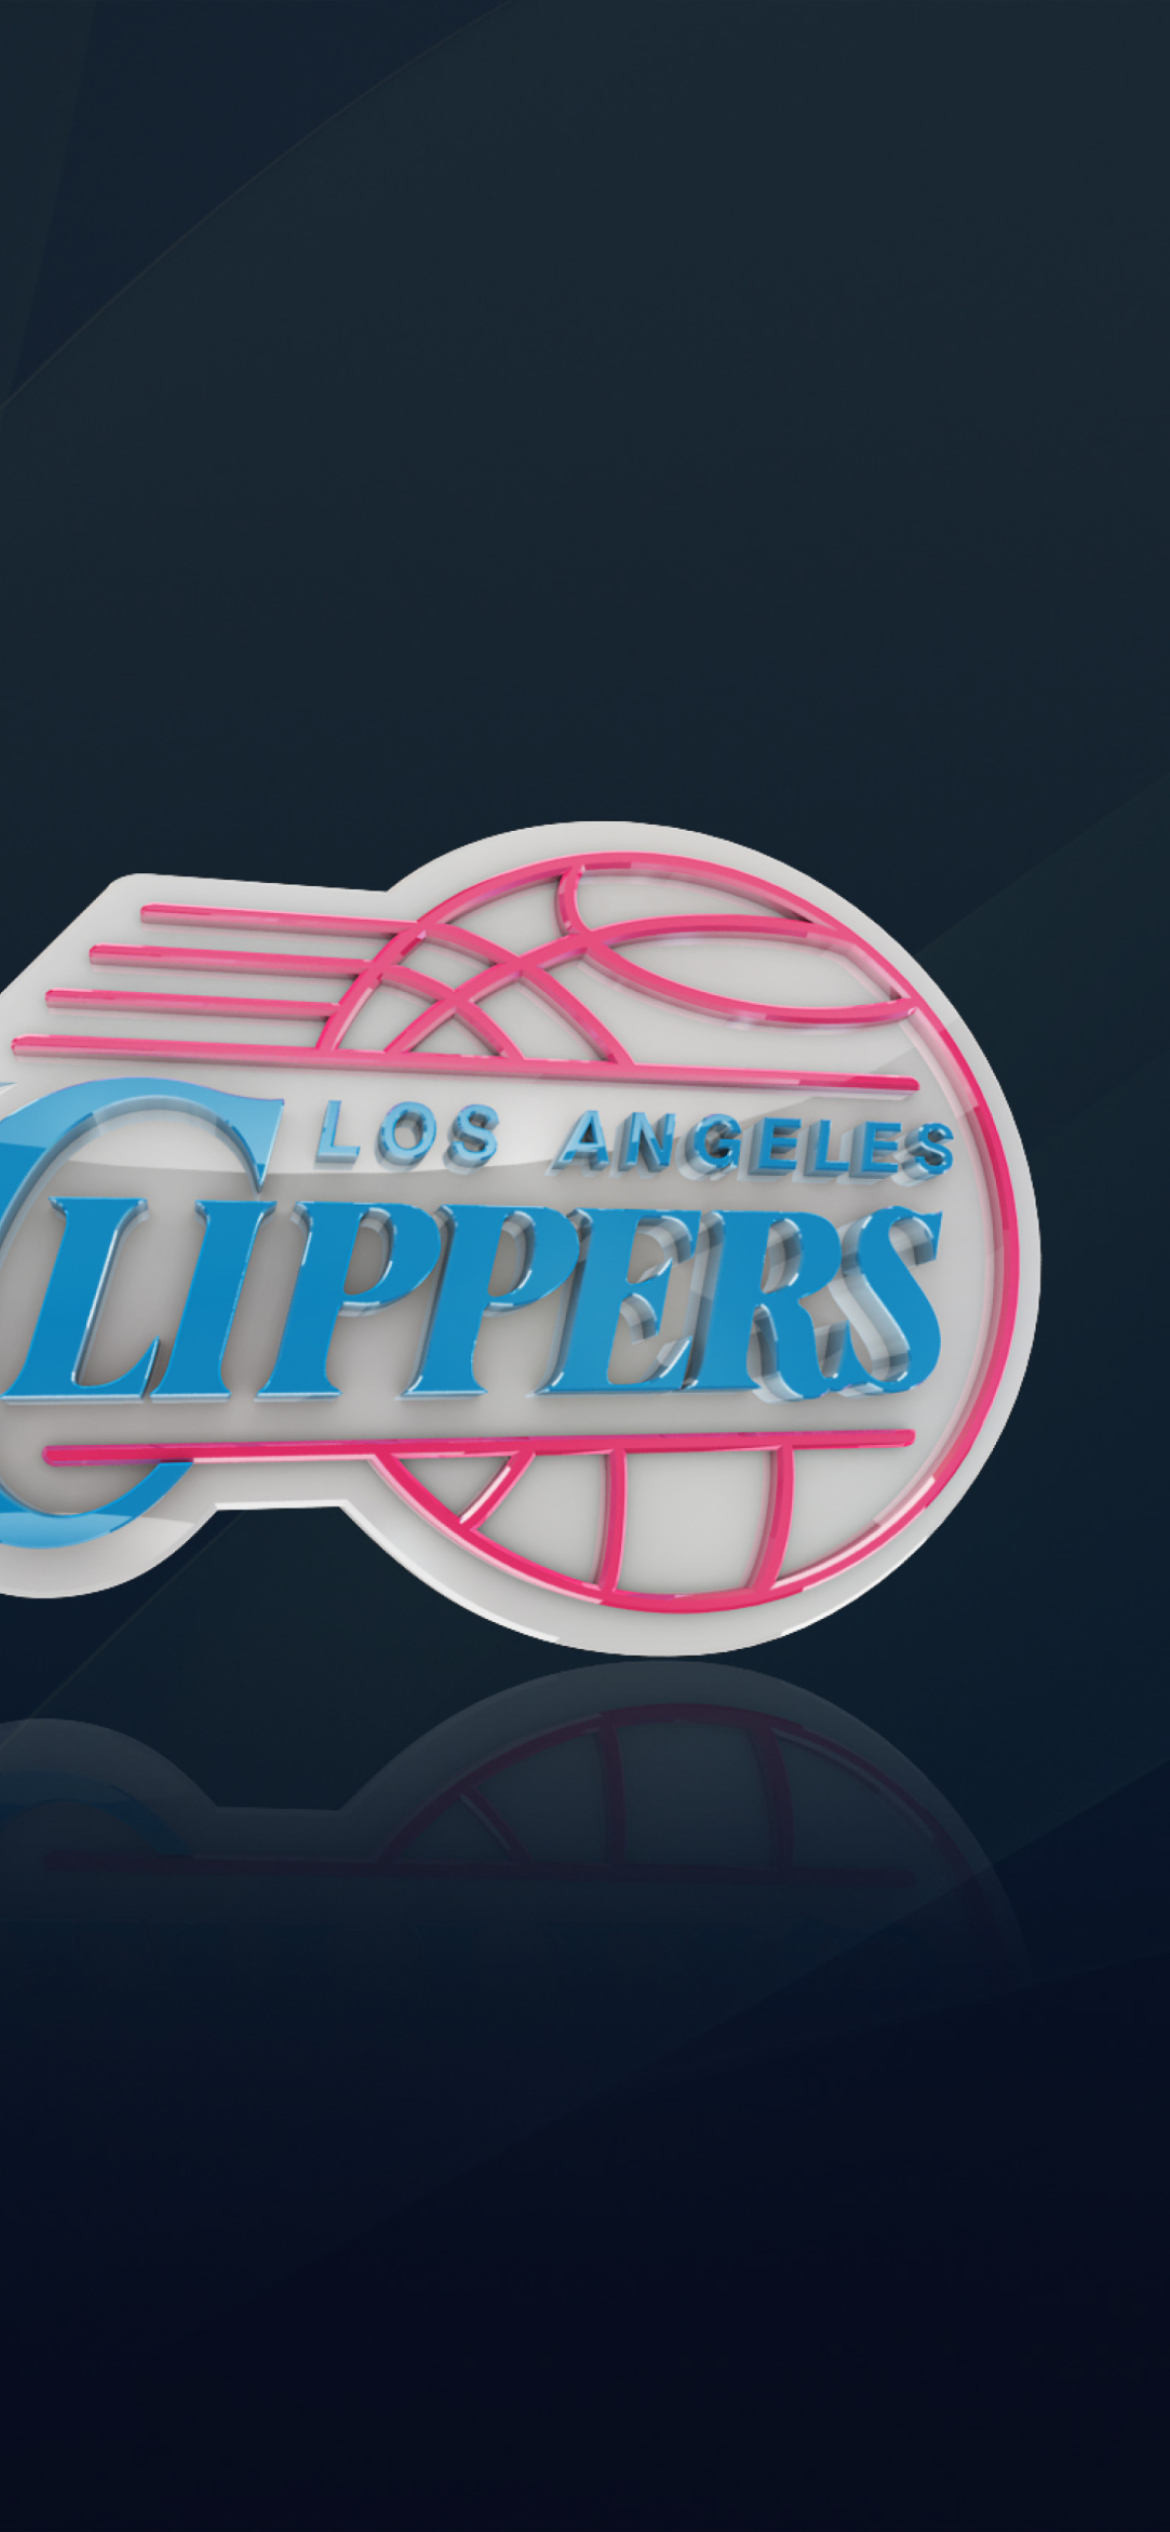 Los Angeles Clippers wallpaper 1170x2532